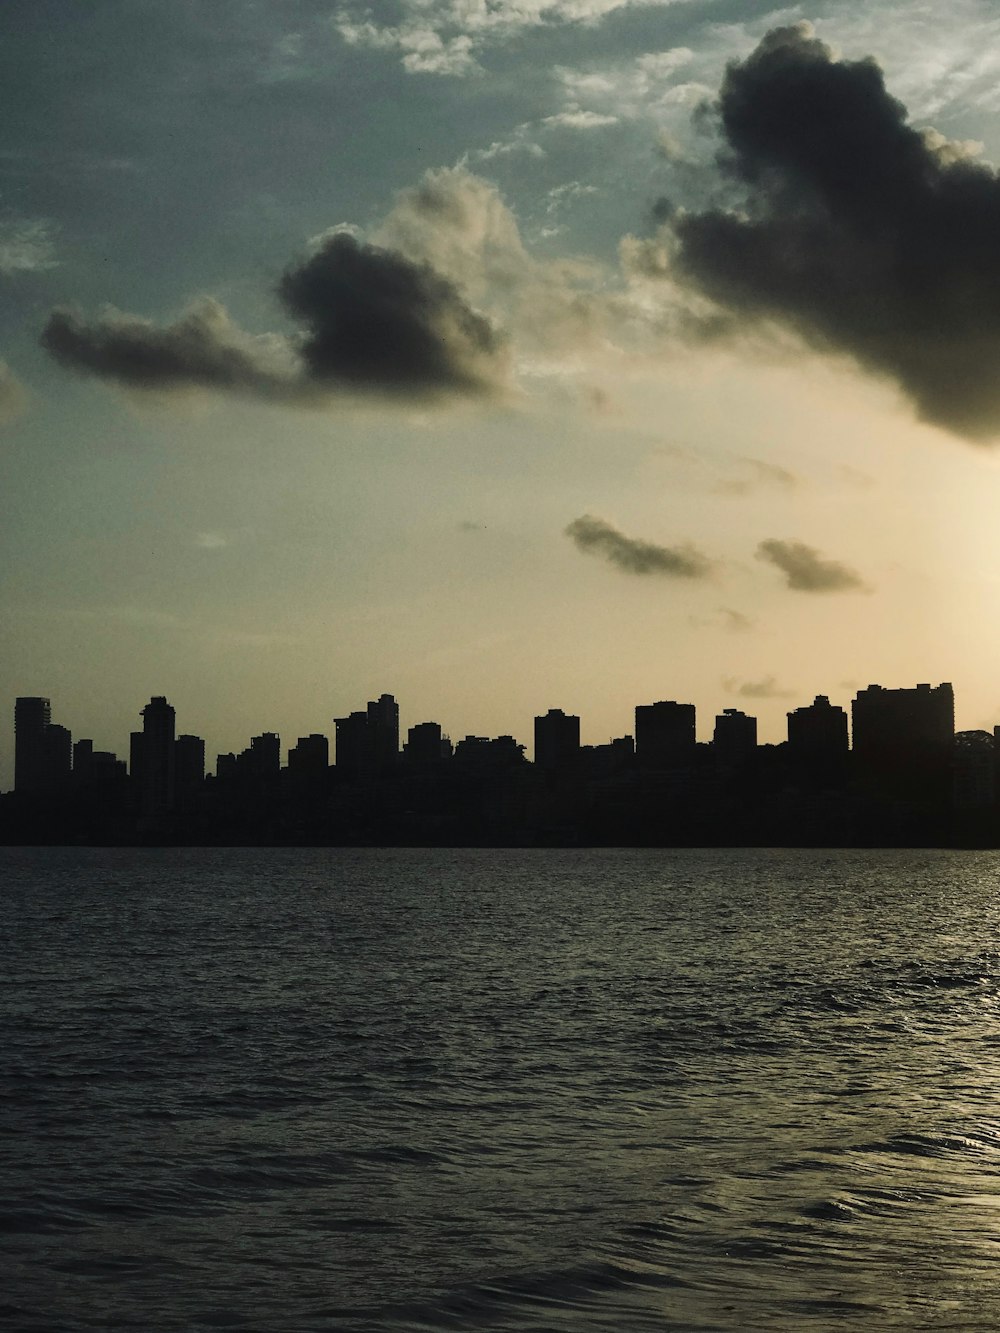 silhouette of city buildings near body of water during sunset